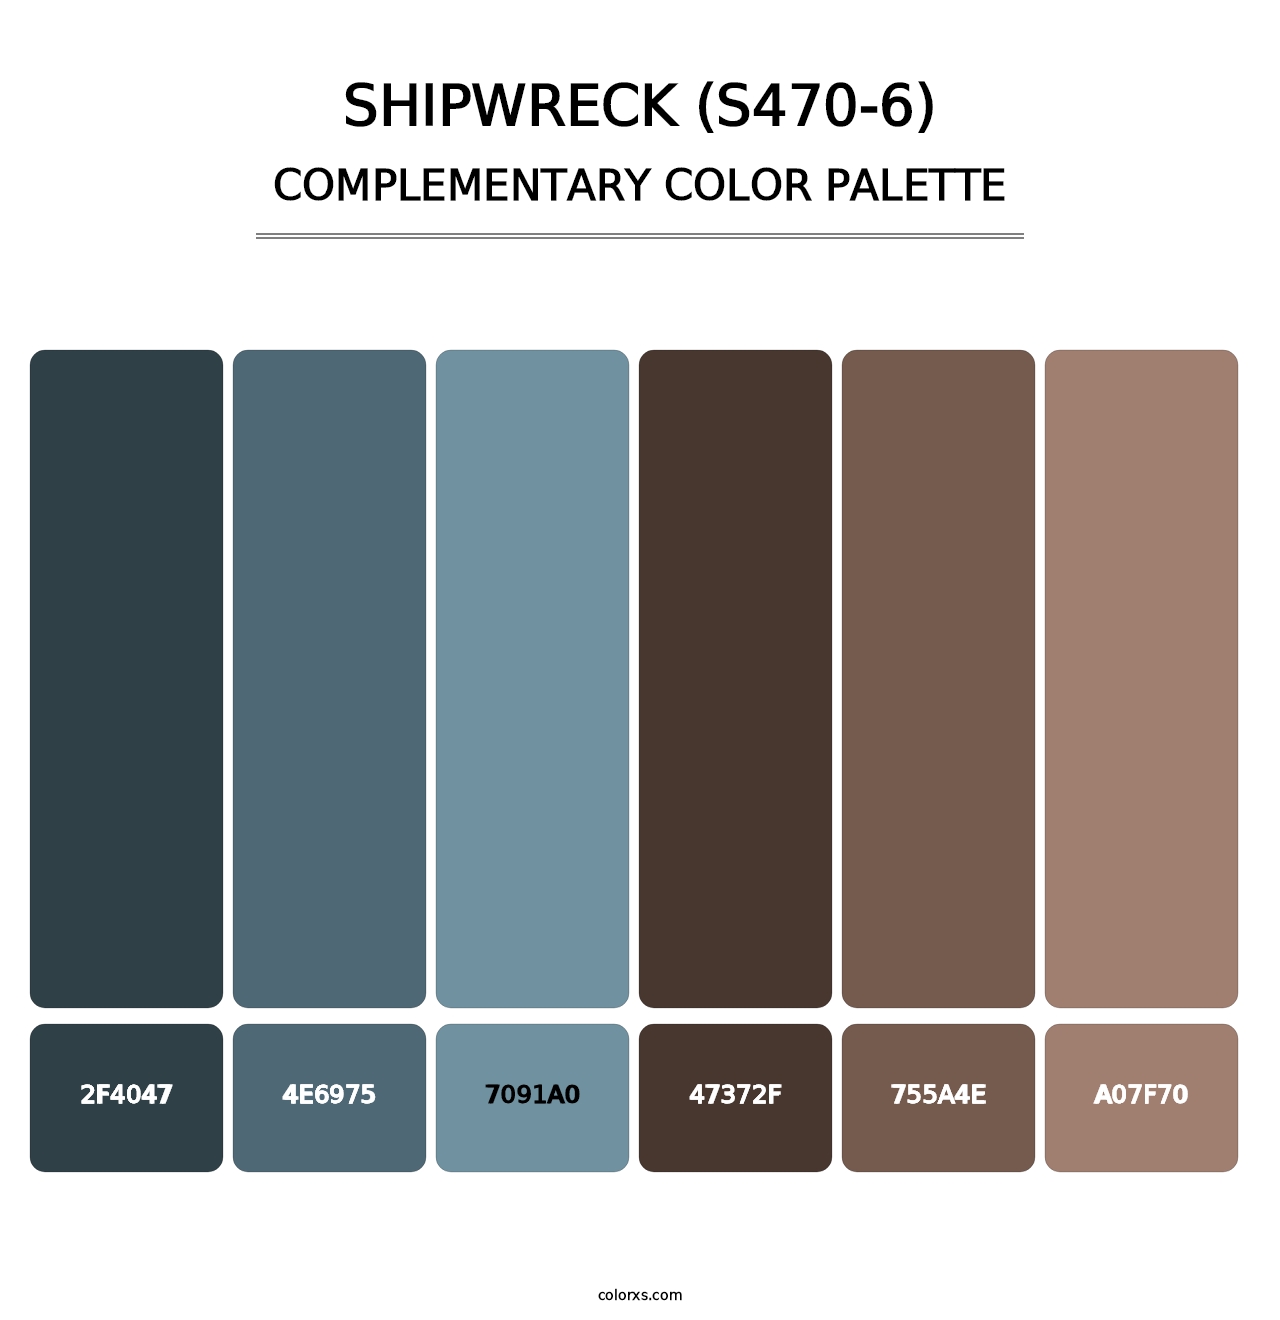 Shipwreck (S470-6) - Complementary Color Palette